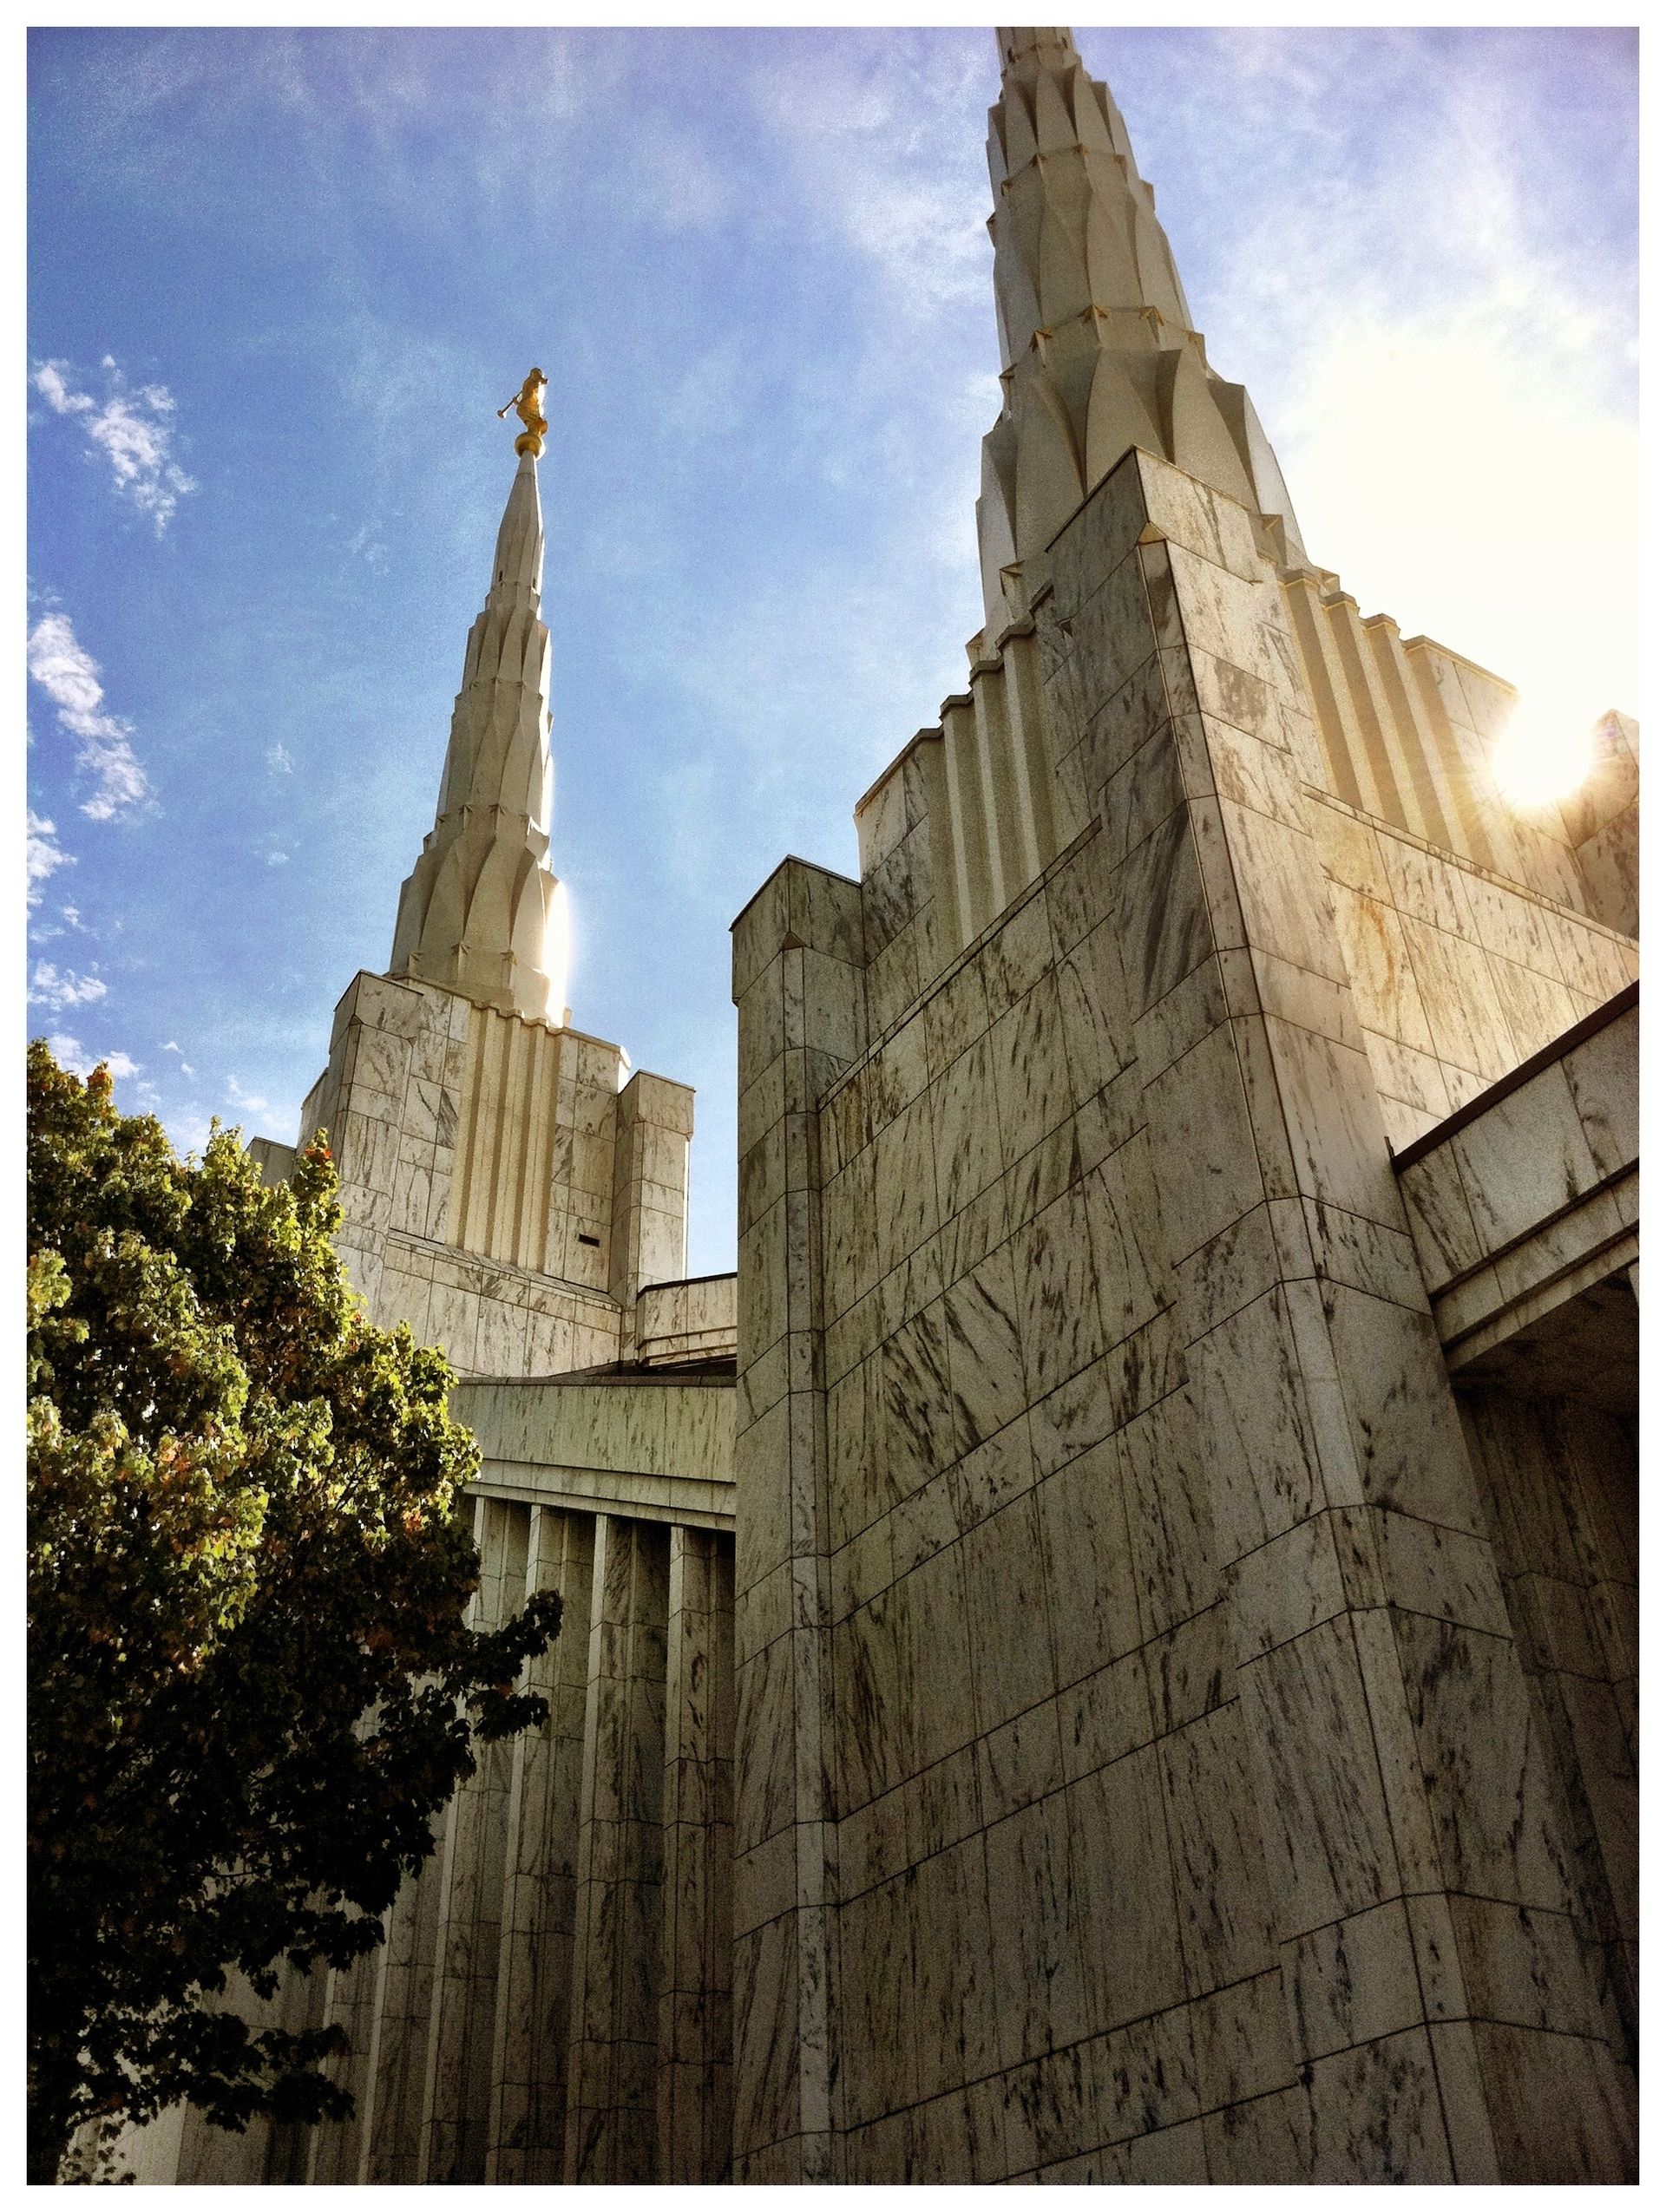 The Portland Oregon Temple spires, including the exterior of the temple.